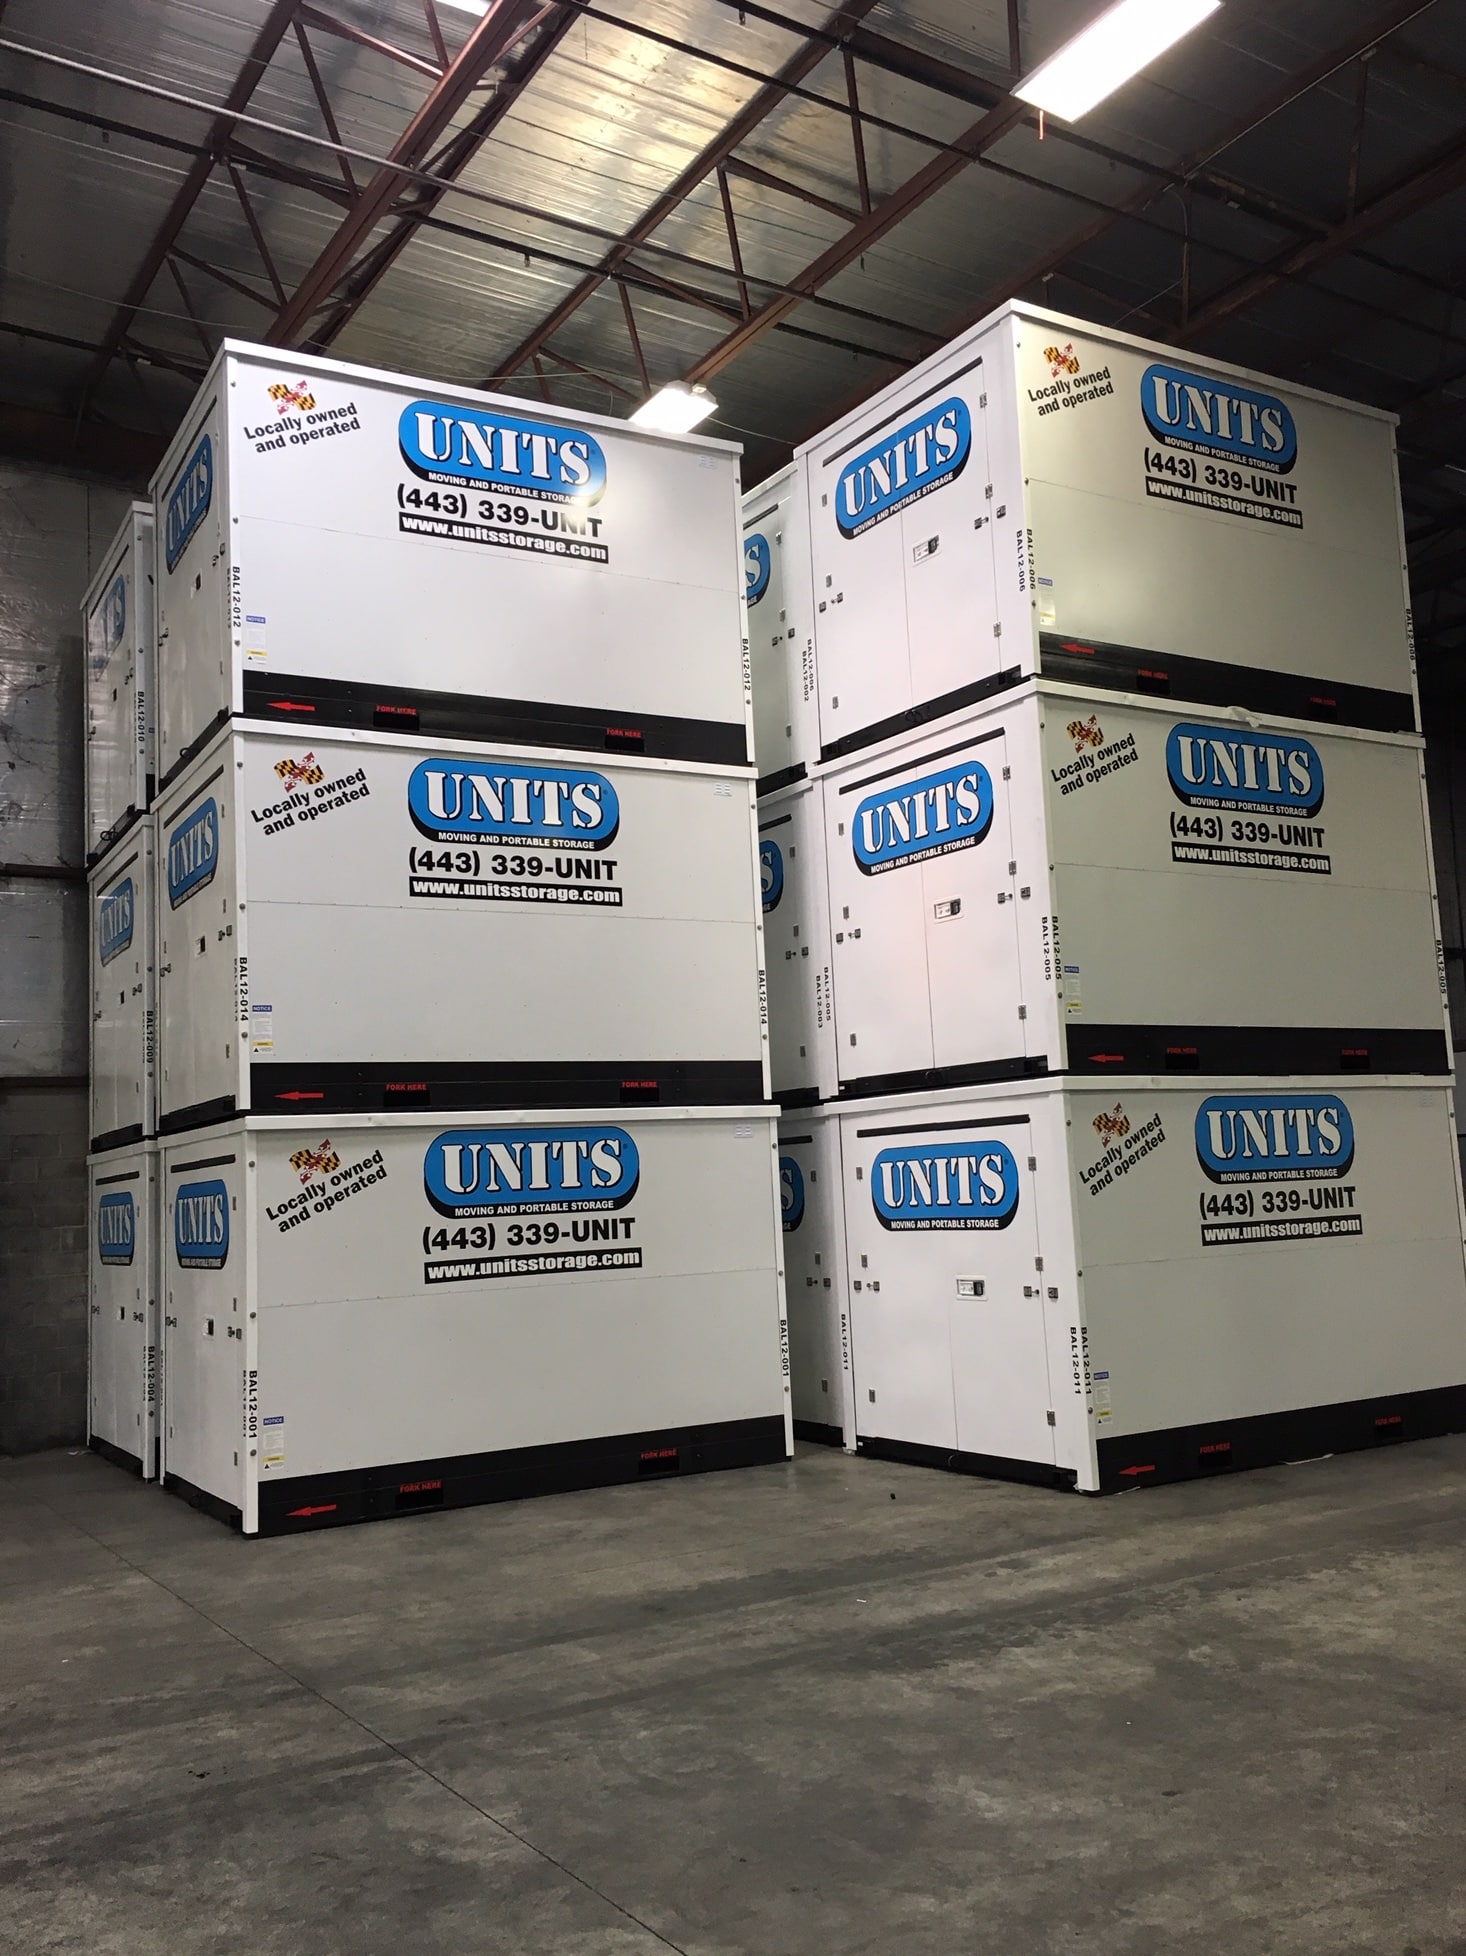 UNITS Portable Storage Containers stored in warehouse in Baltimore Maryland